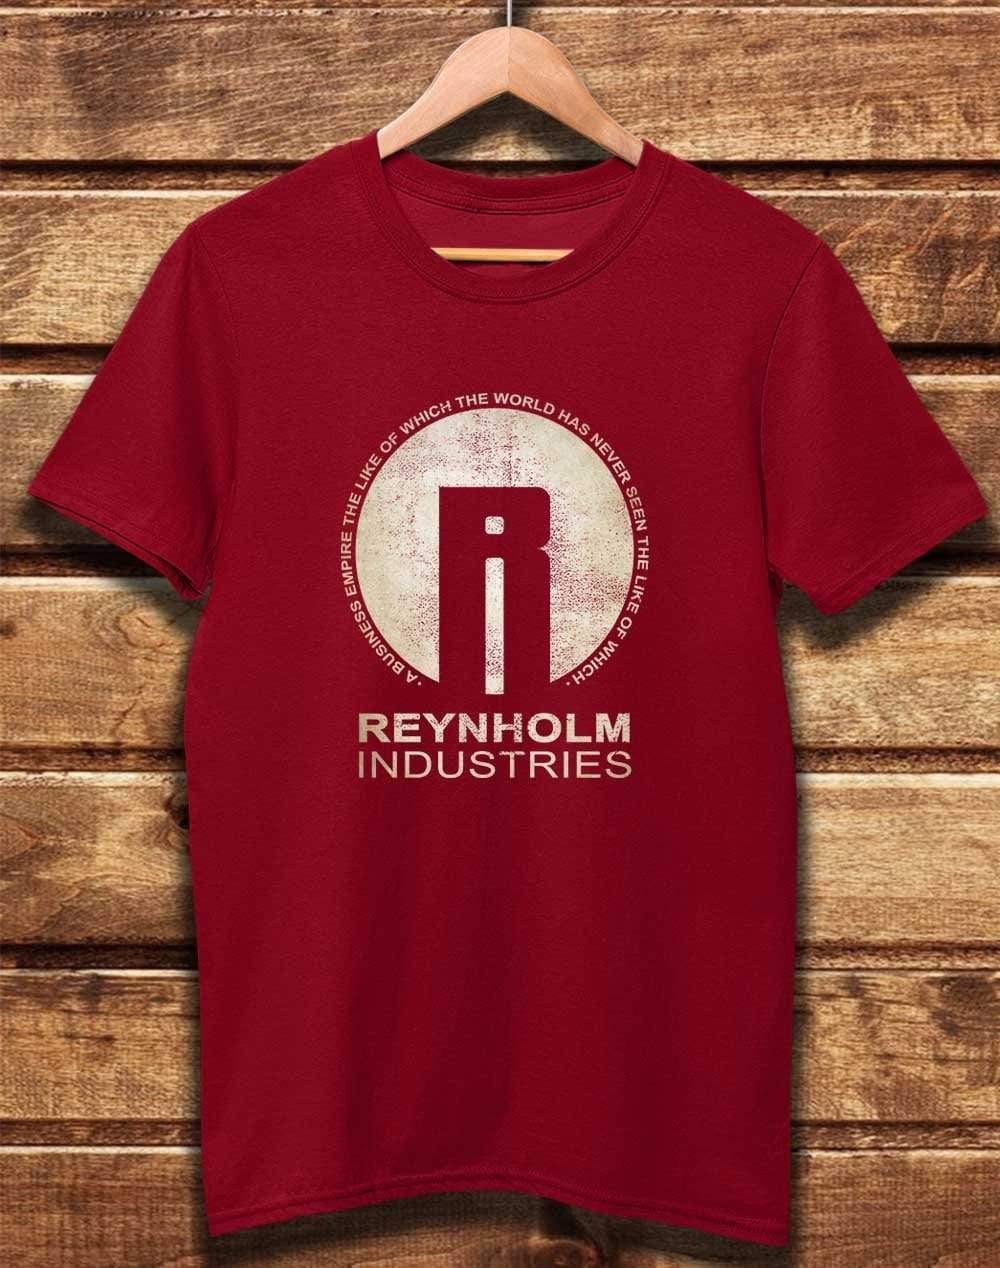 DELUXE Reynholm Industries Organic Cotton T-Shirt XS / Dark Red  - Off World Tees